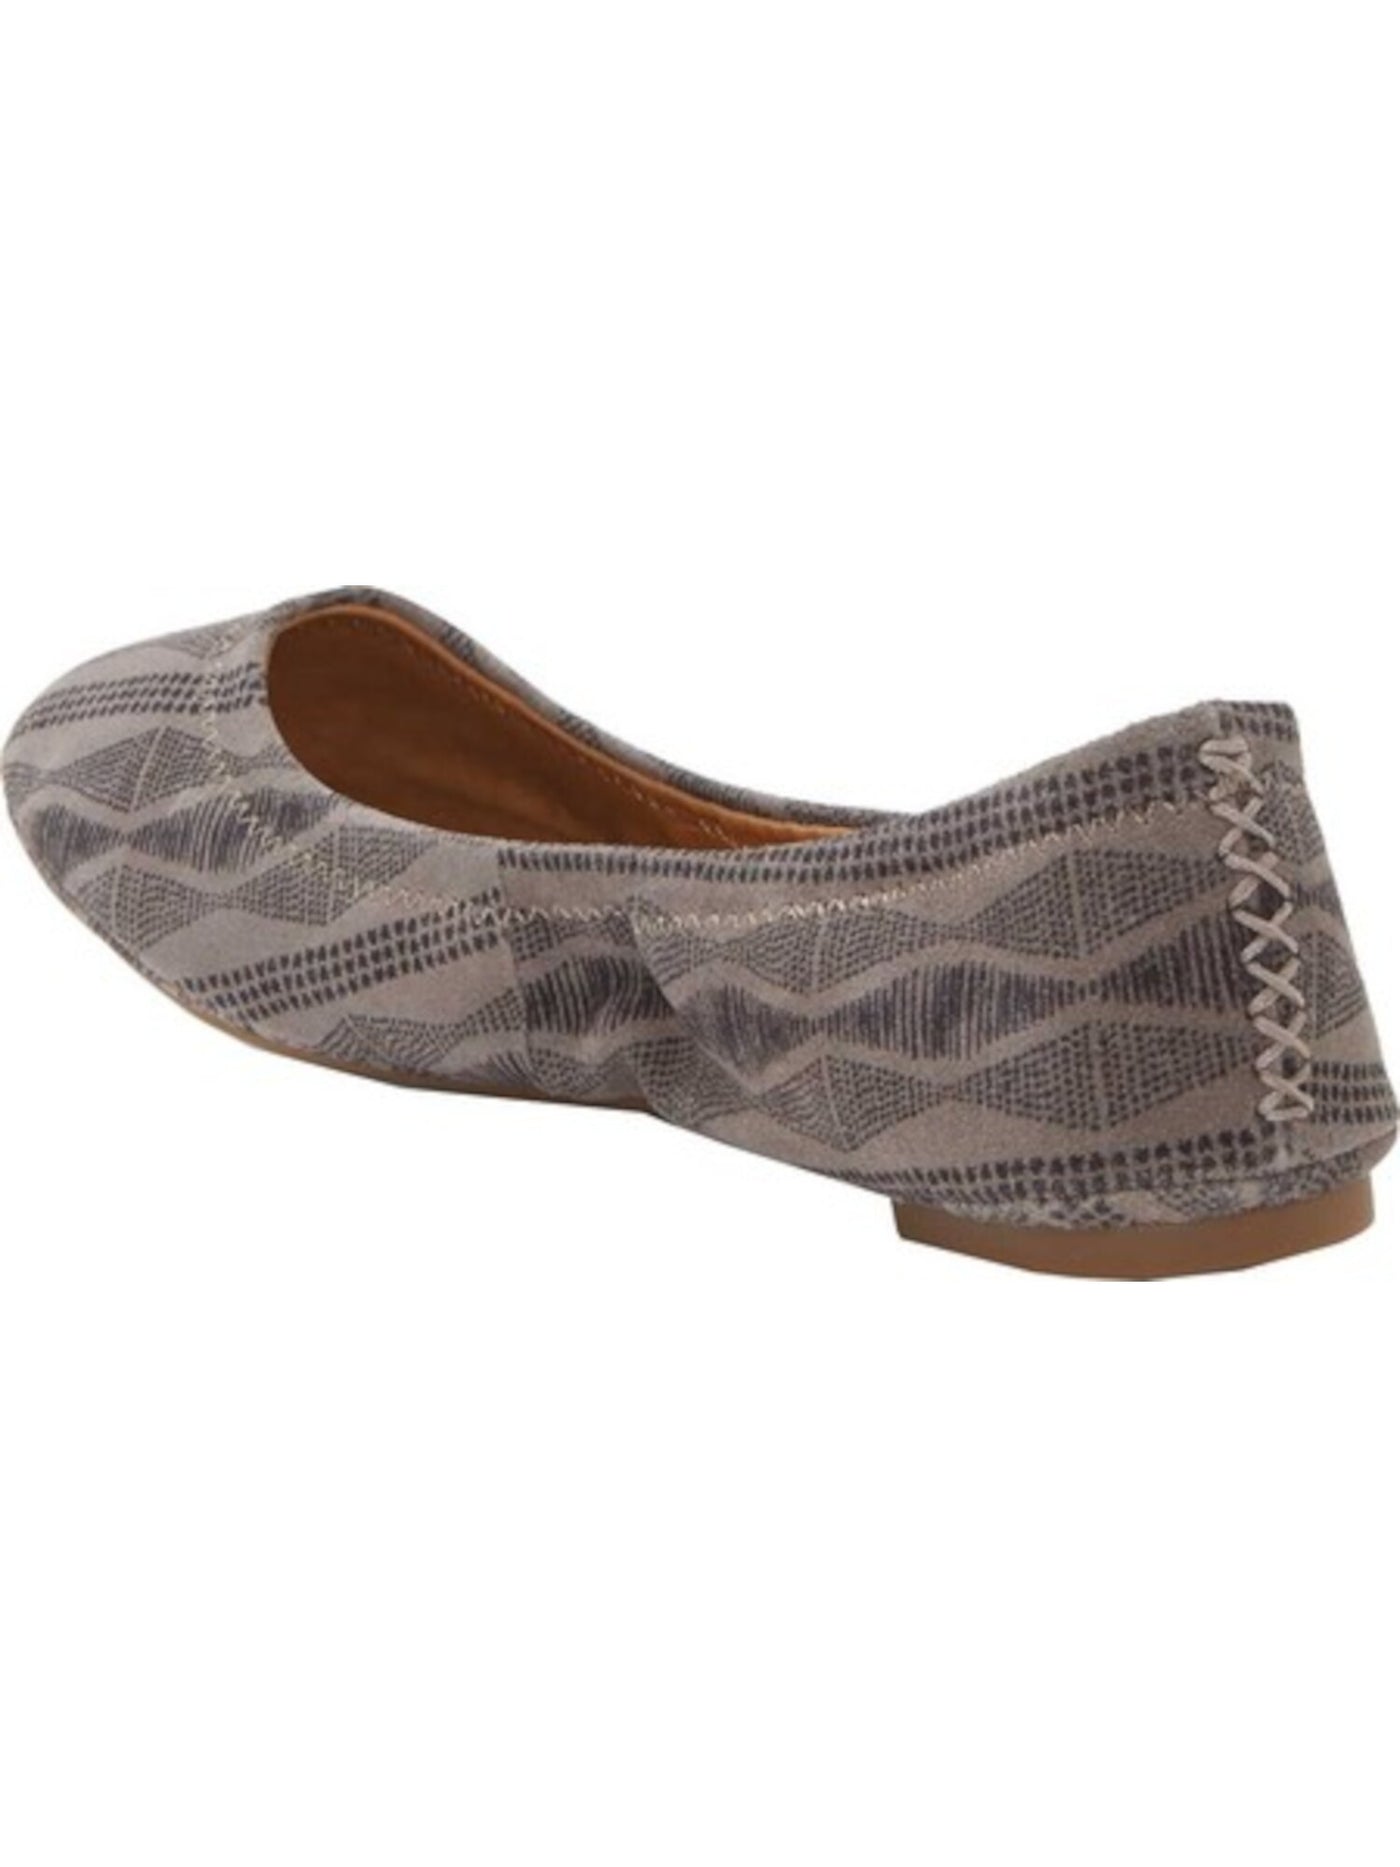 LUCKY BRAND Womens Gray Geometric Ruched Cushioned Stretch Emmie Round Toe Block Heel Slip On Leather Ballet Flats 8 M